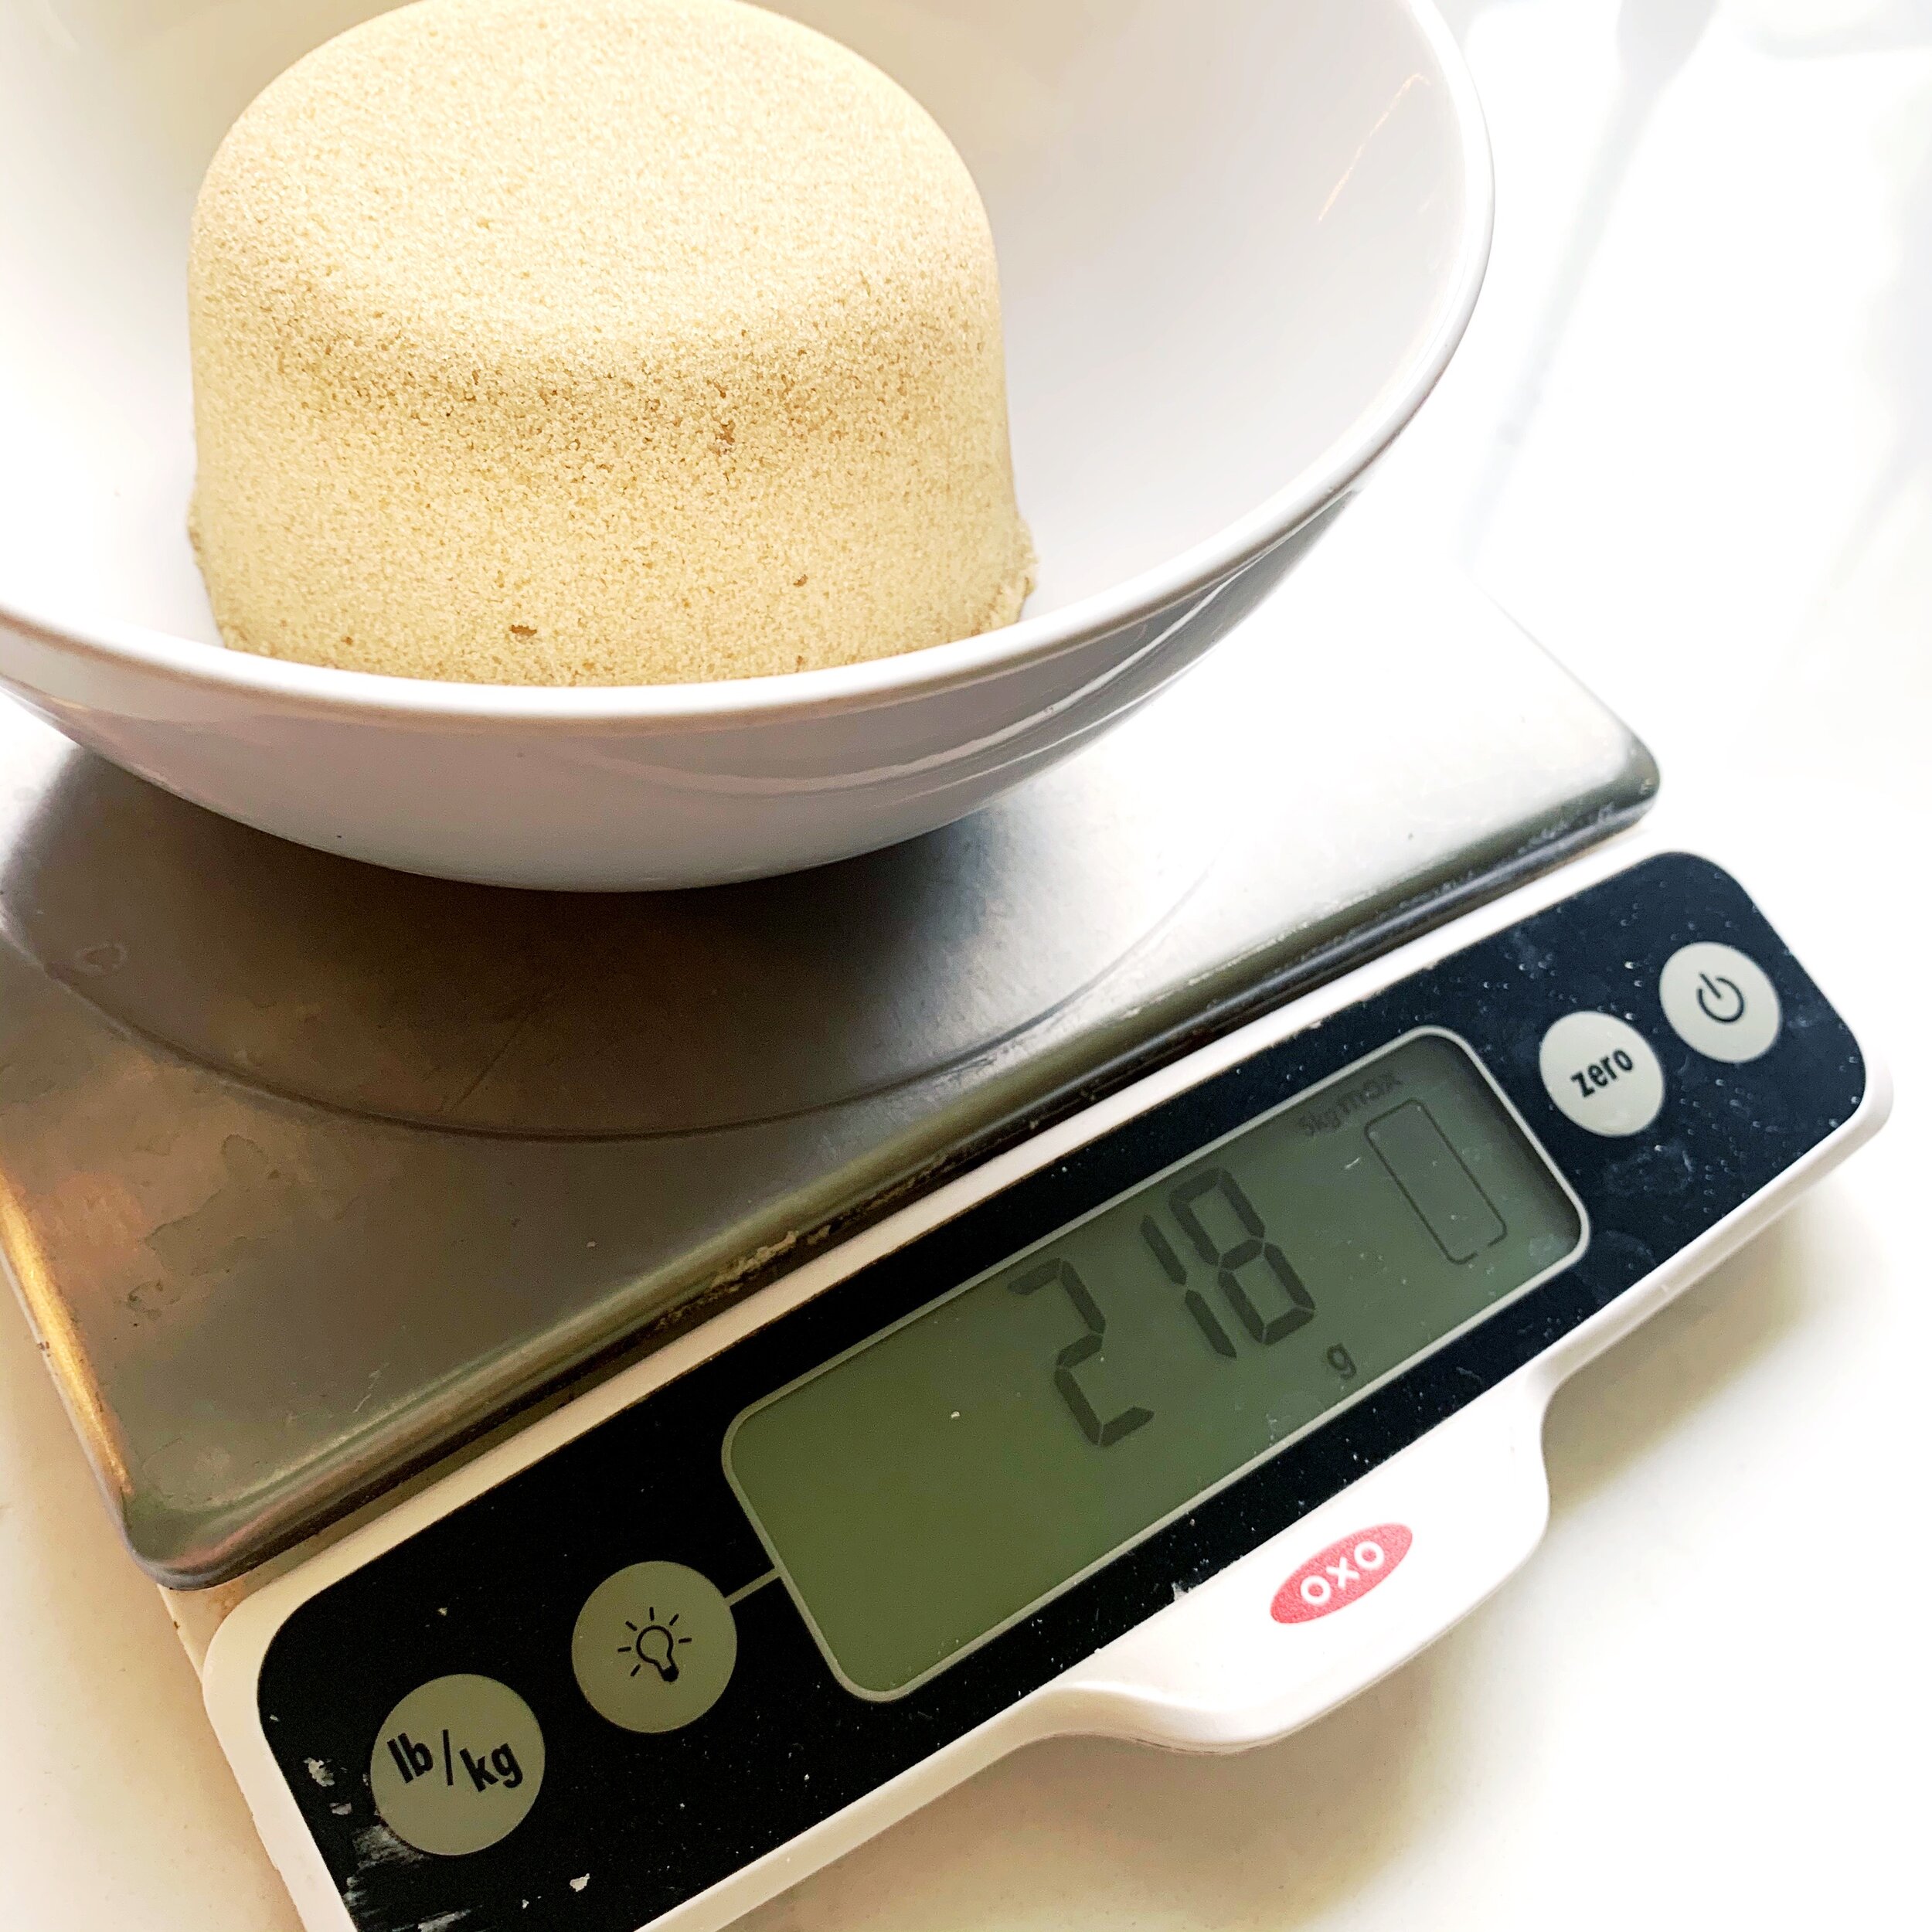 Why You Need a Kitchen Scale